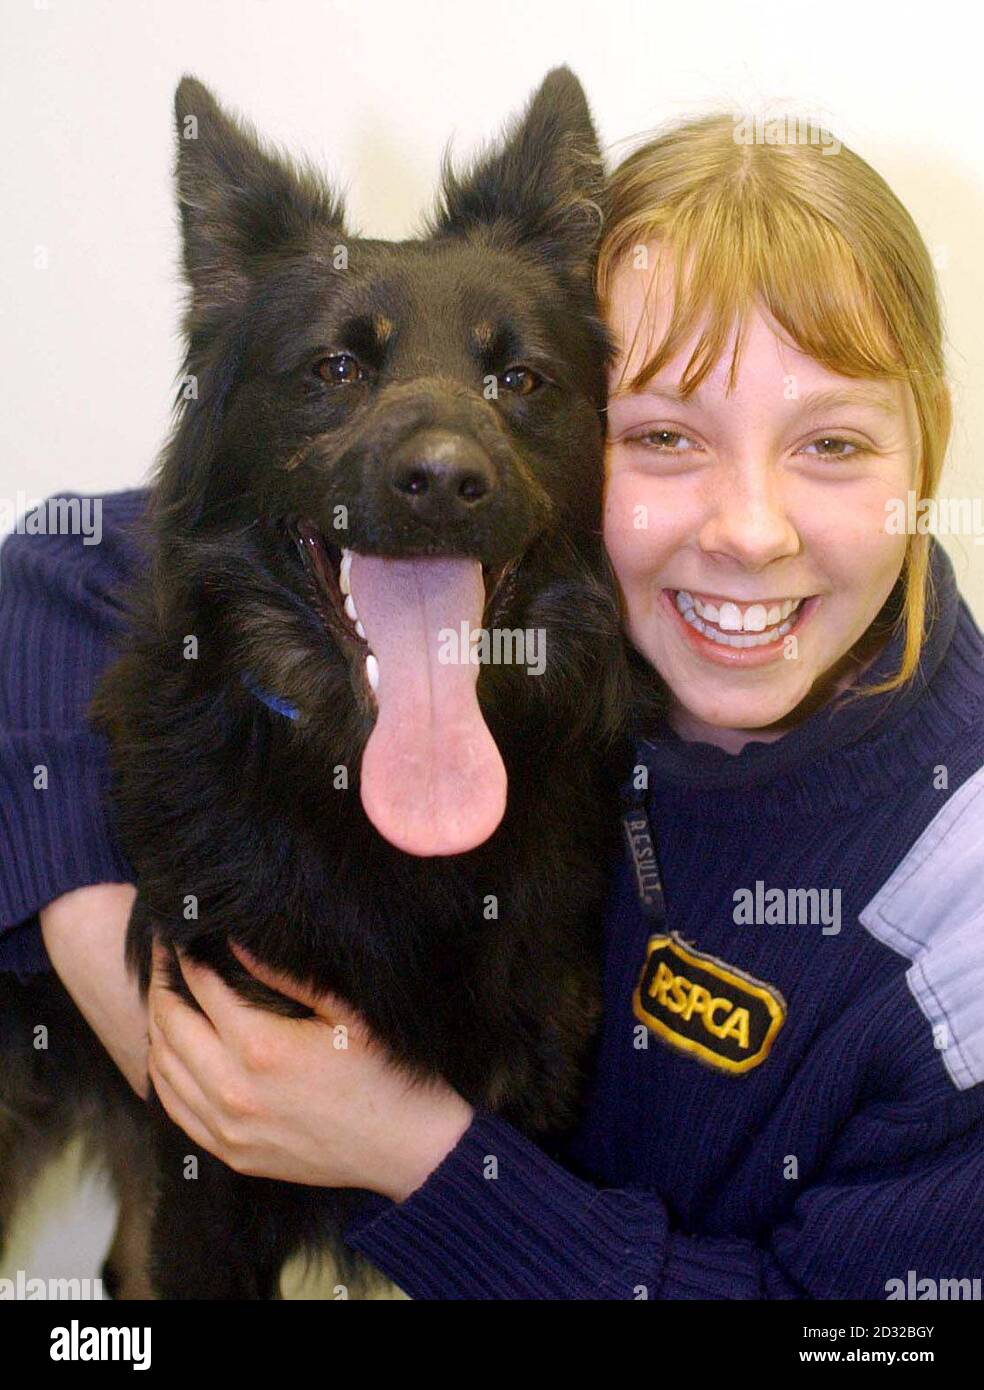 Gerry, the one year old dog that animal welfare experts believe may have been thrown into a canal with its mouth taped shut, is looked after by the RSPCA's Claire Chapman, 18, at the charity's animal centre in Coventry.  * ....  A passer-by discovered the one-year-old black and tan cross breed on the bank of the canal at Little Heath, nr Coventry, with white industrial tape wrapped around his muzzle and a wet coat. Stock Photo